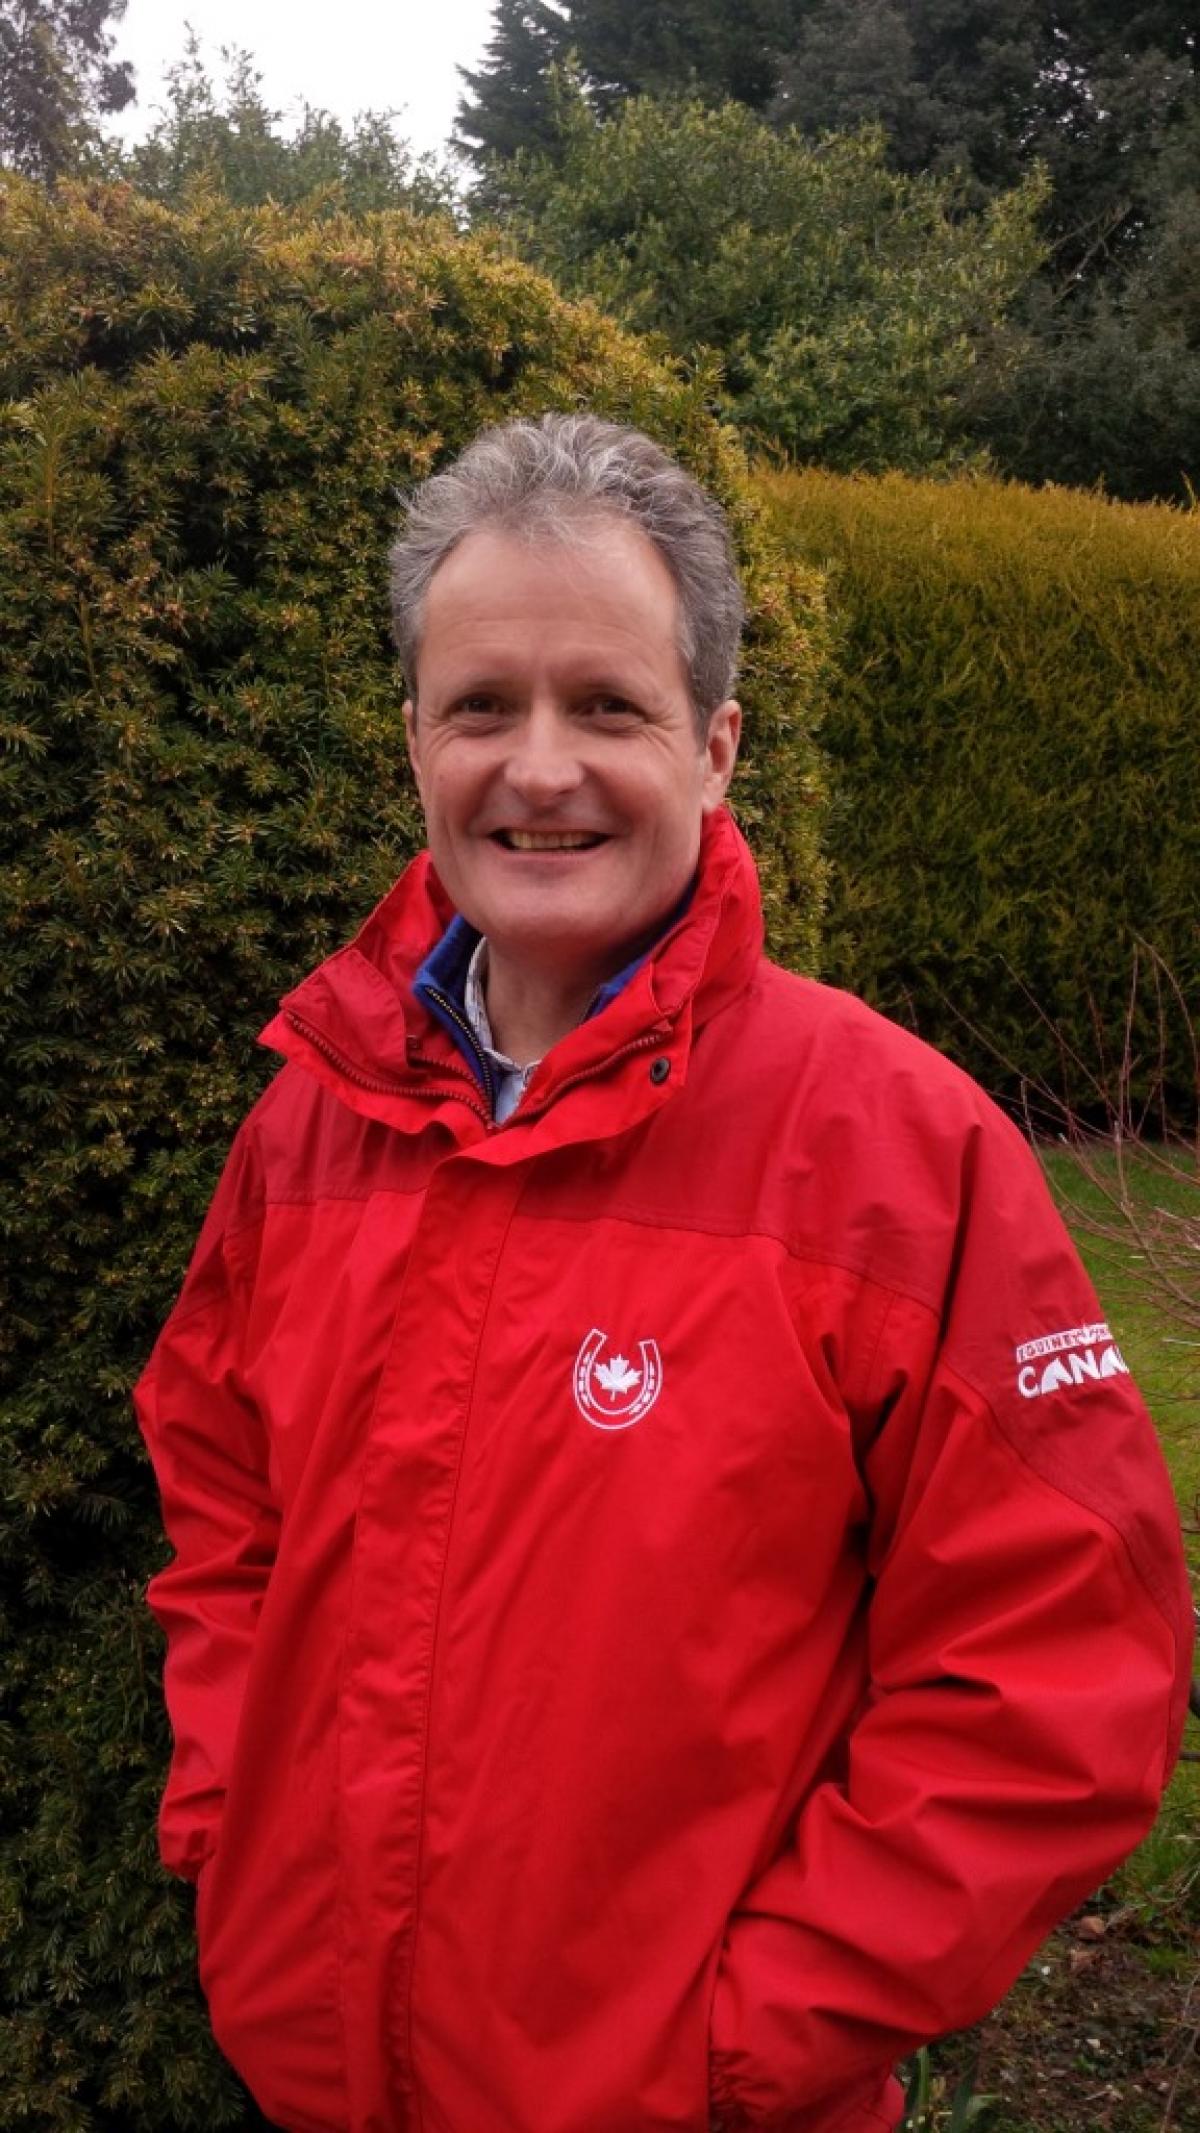 Portrait photo of a man in a red jacket